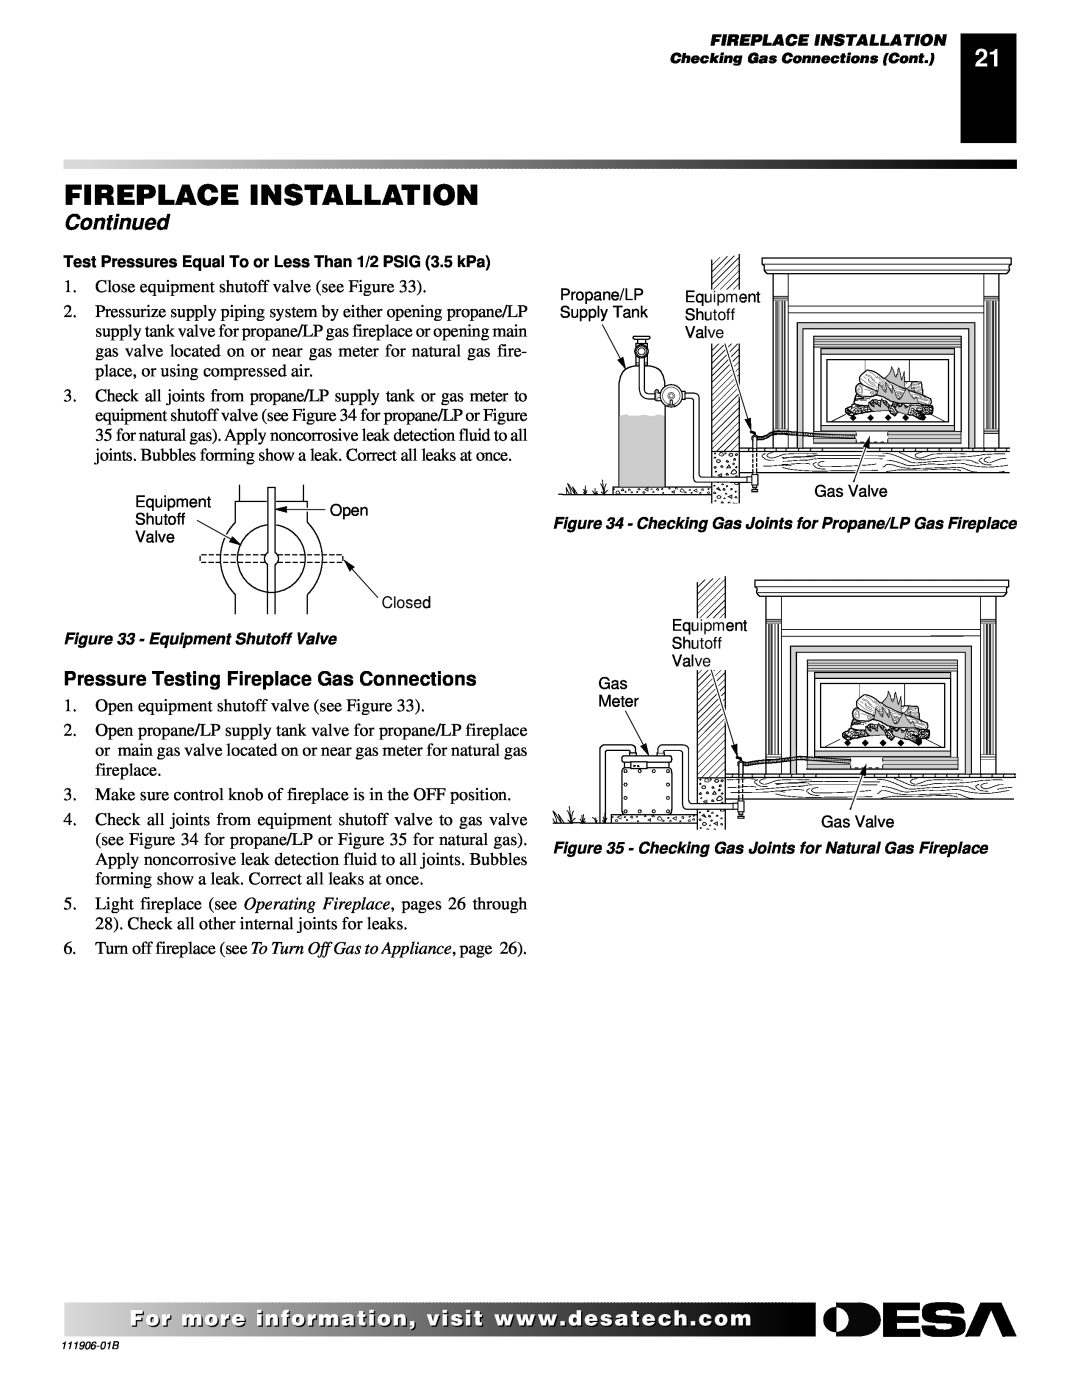 Desa CHDV42NRA, (V)V42PA(1) Fireplace Installation, Continued, Pressure Testing Fireplace Gas Connections 